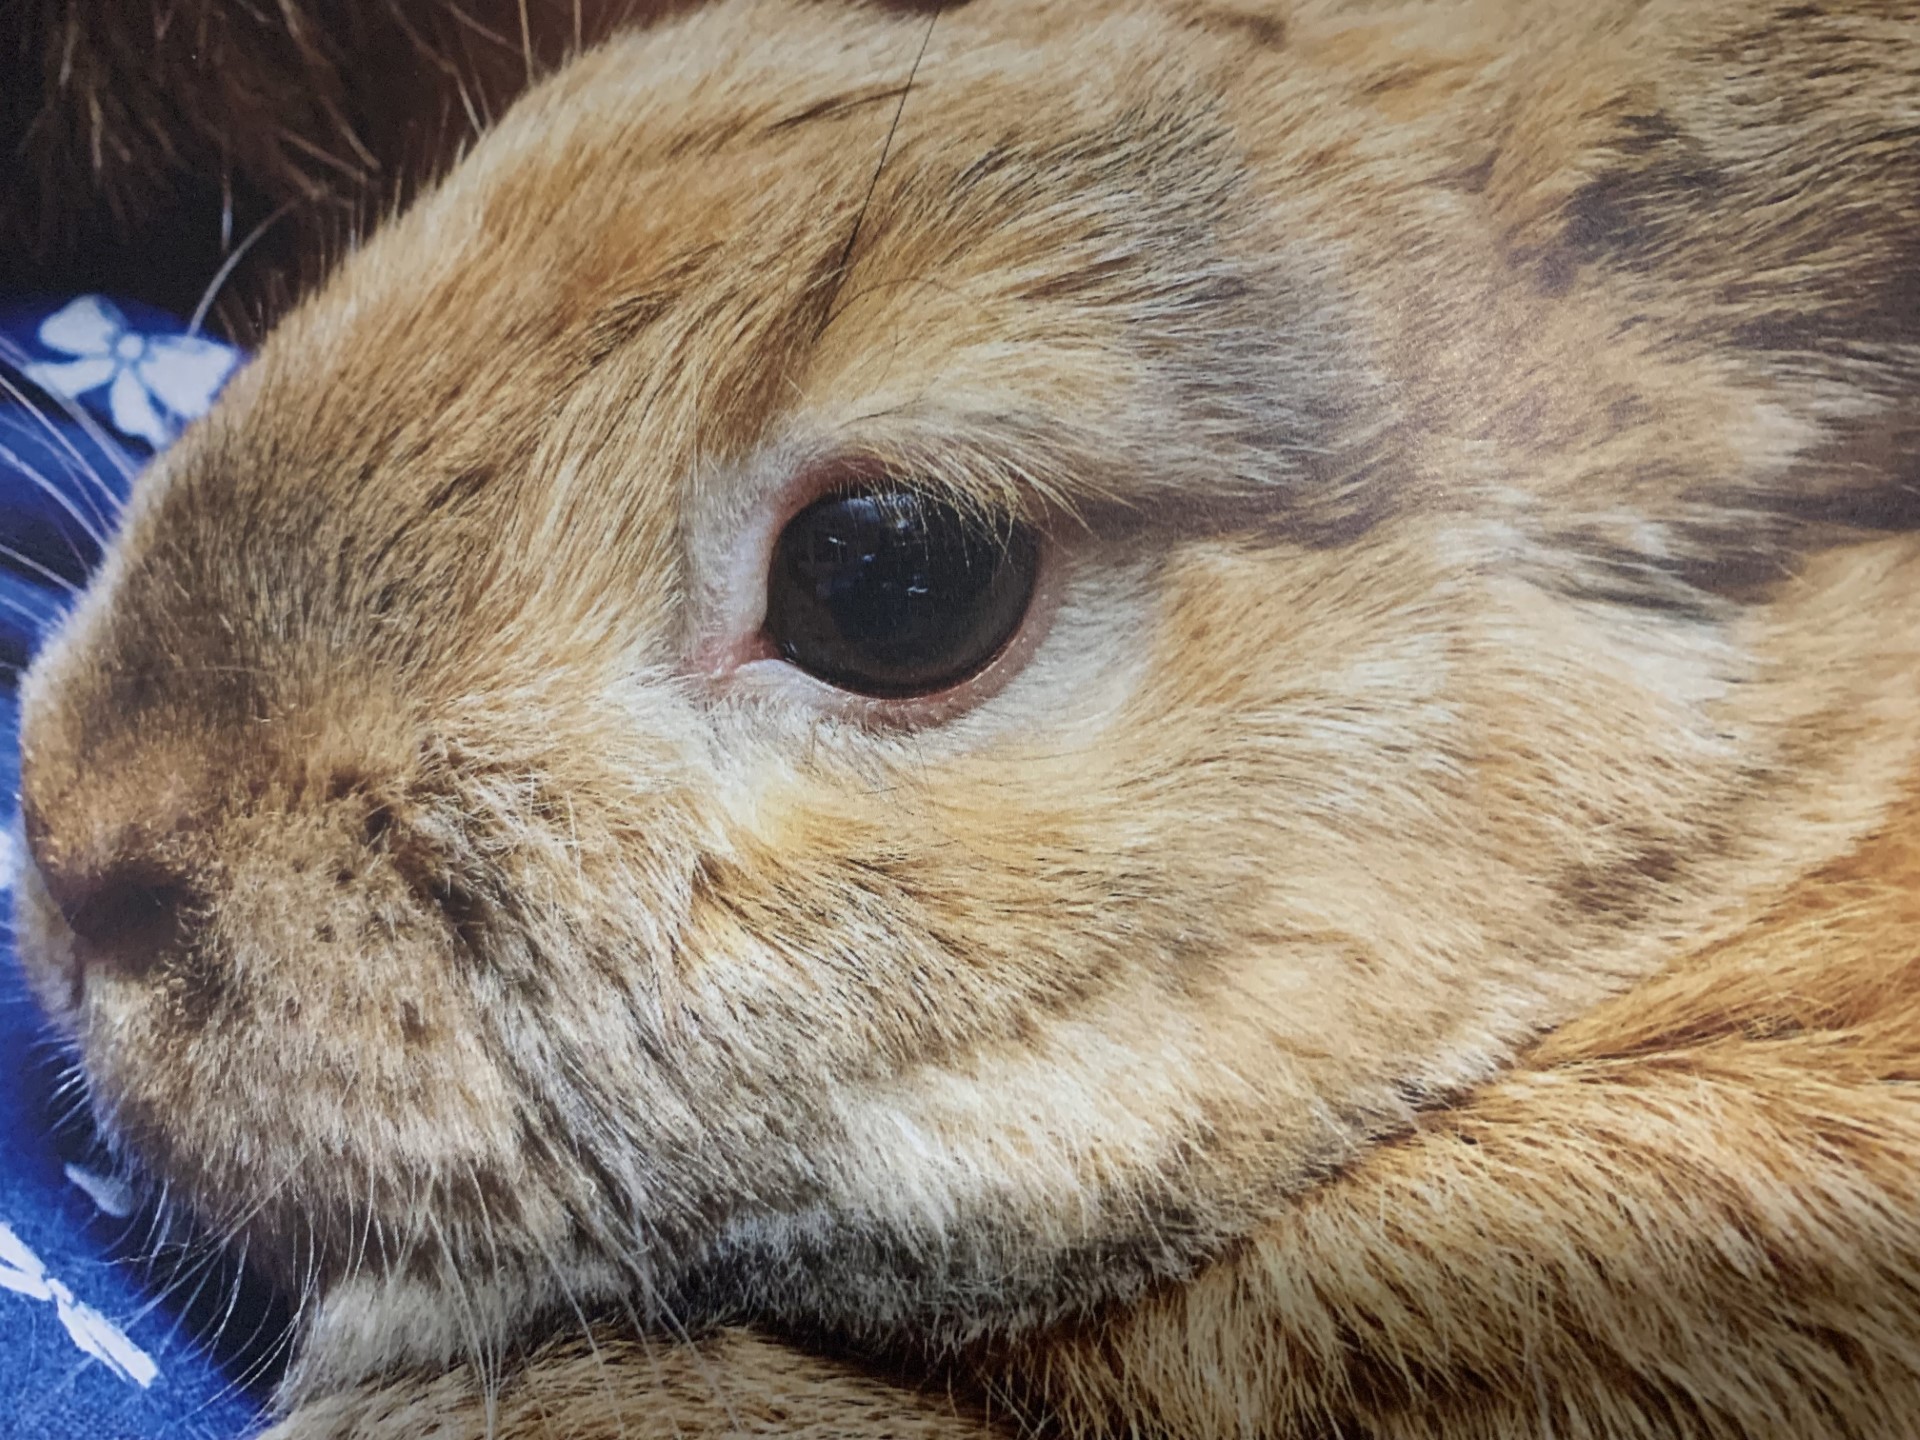 The face of a rabbit